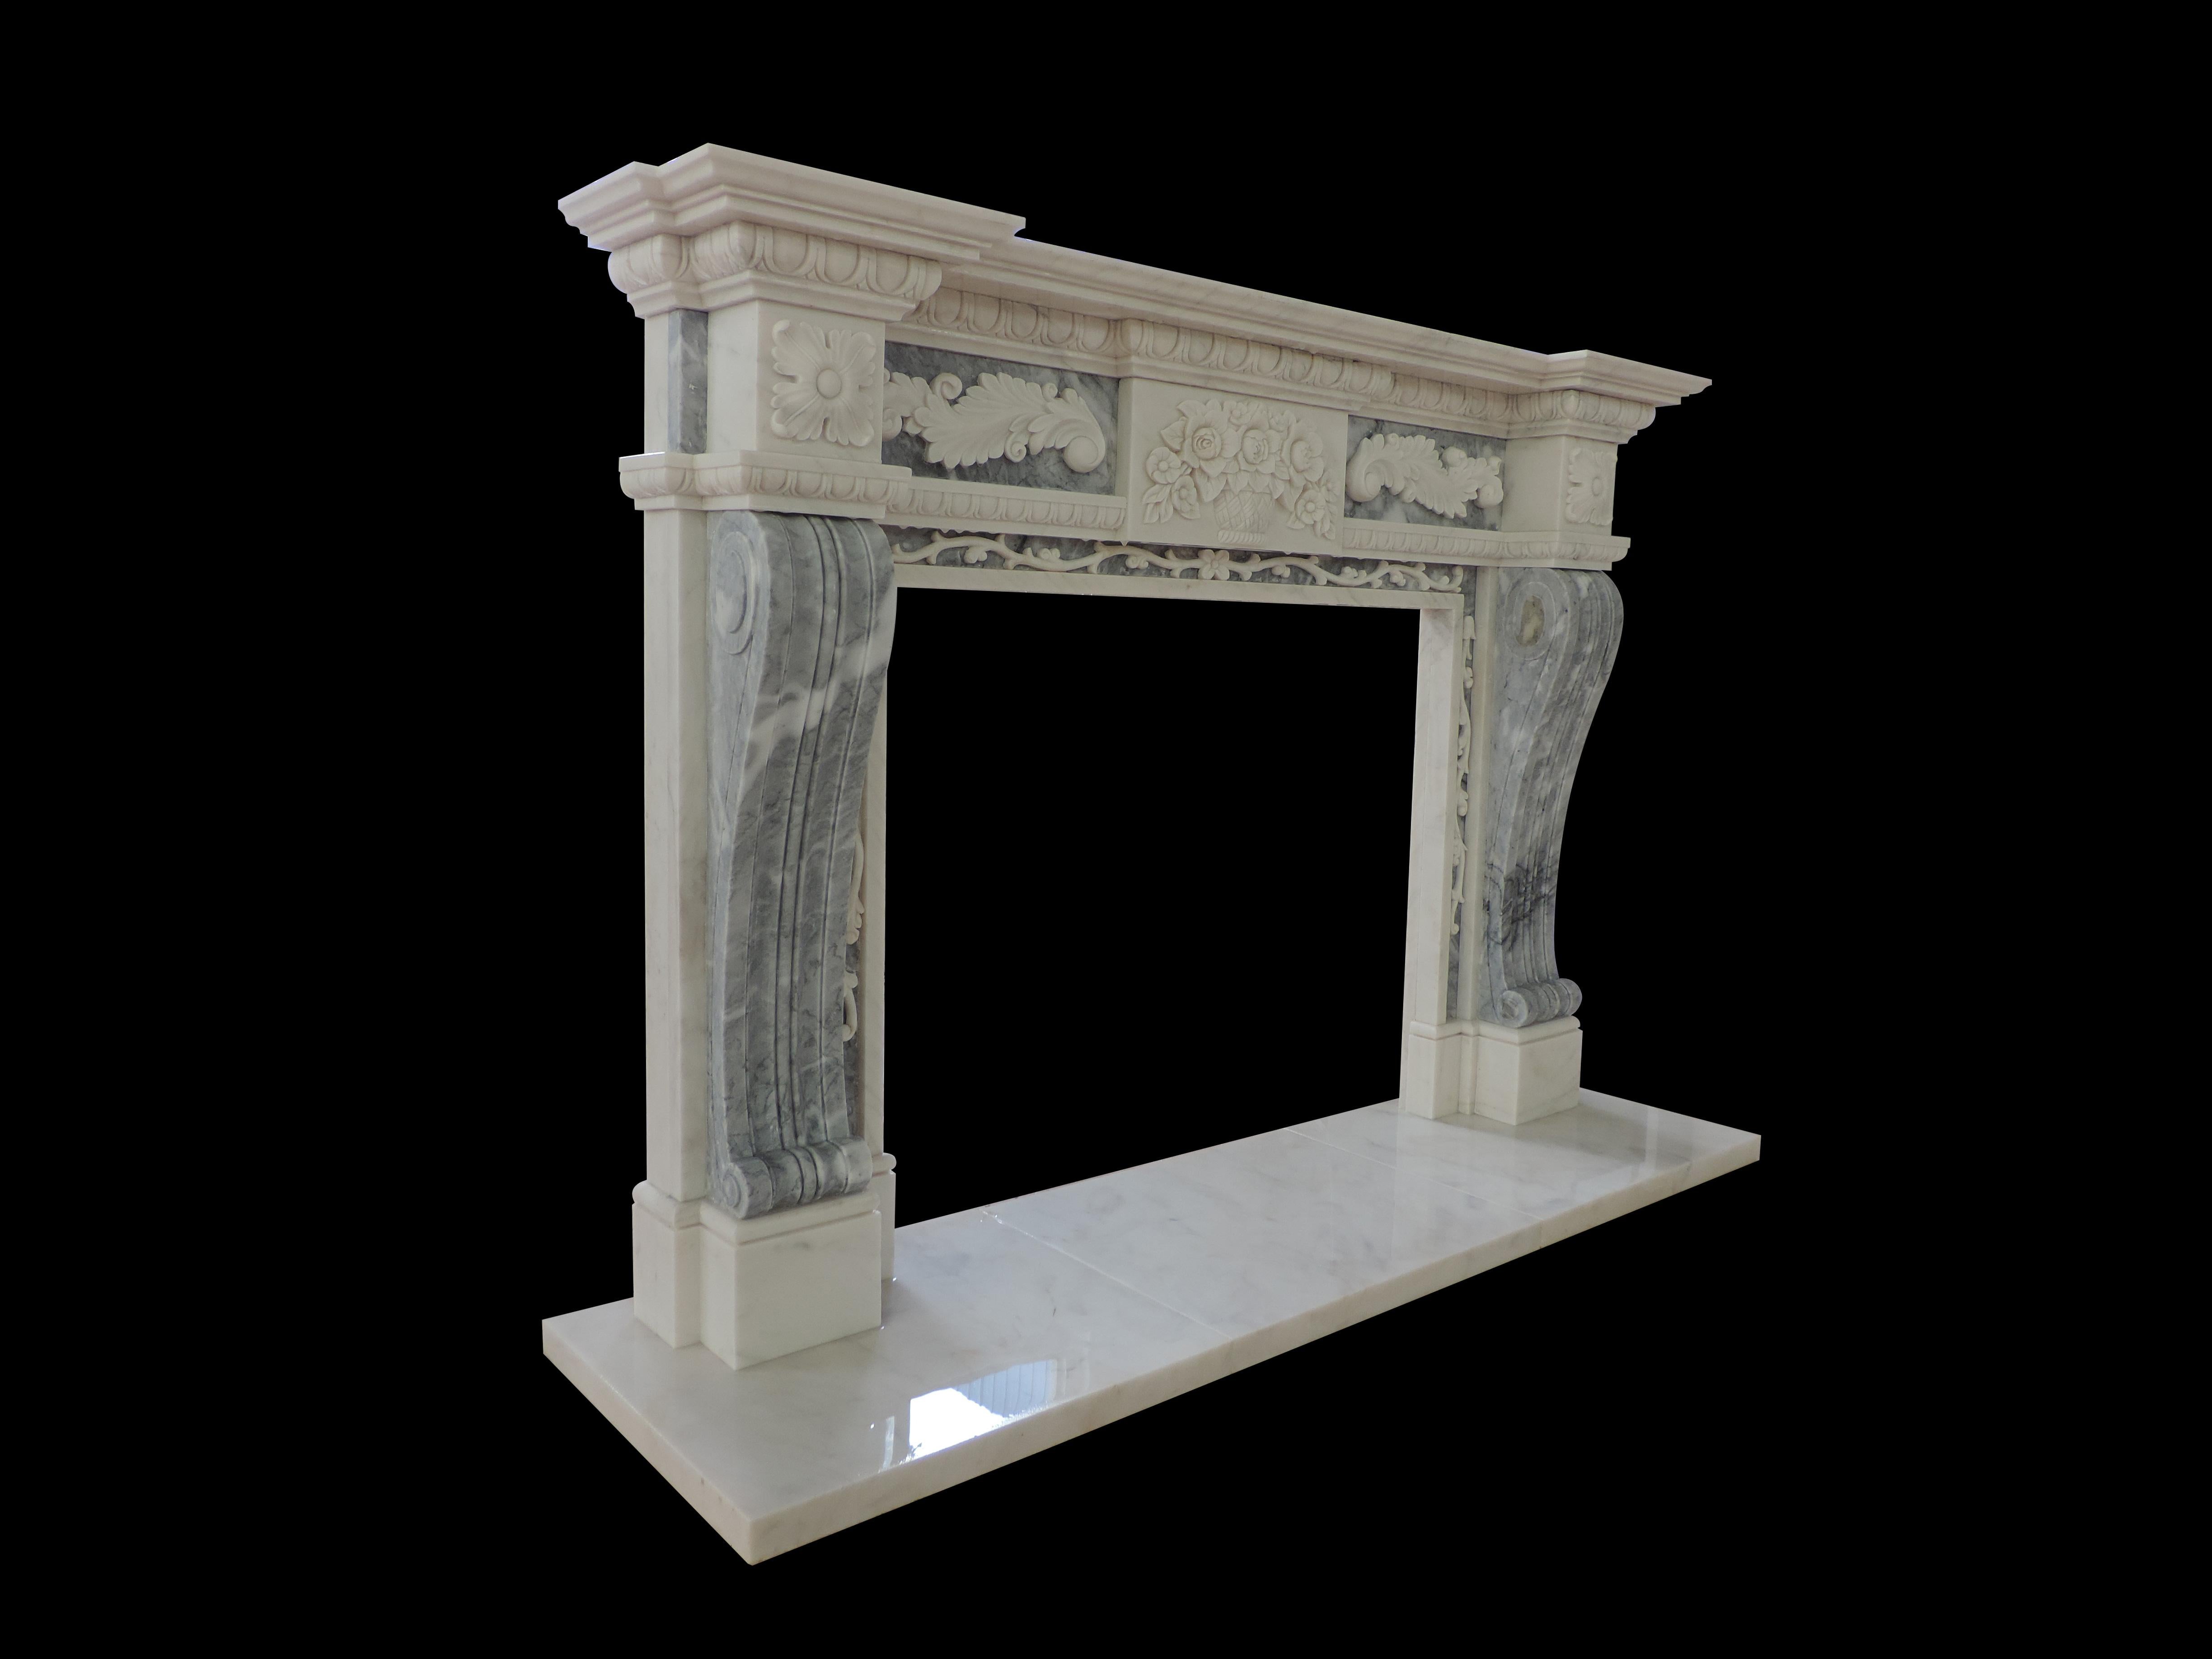 The mantle is hand carved from natural blocks of marble from the quarry.